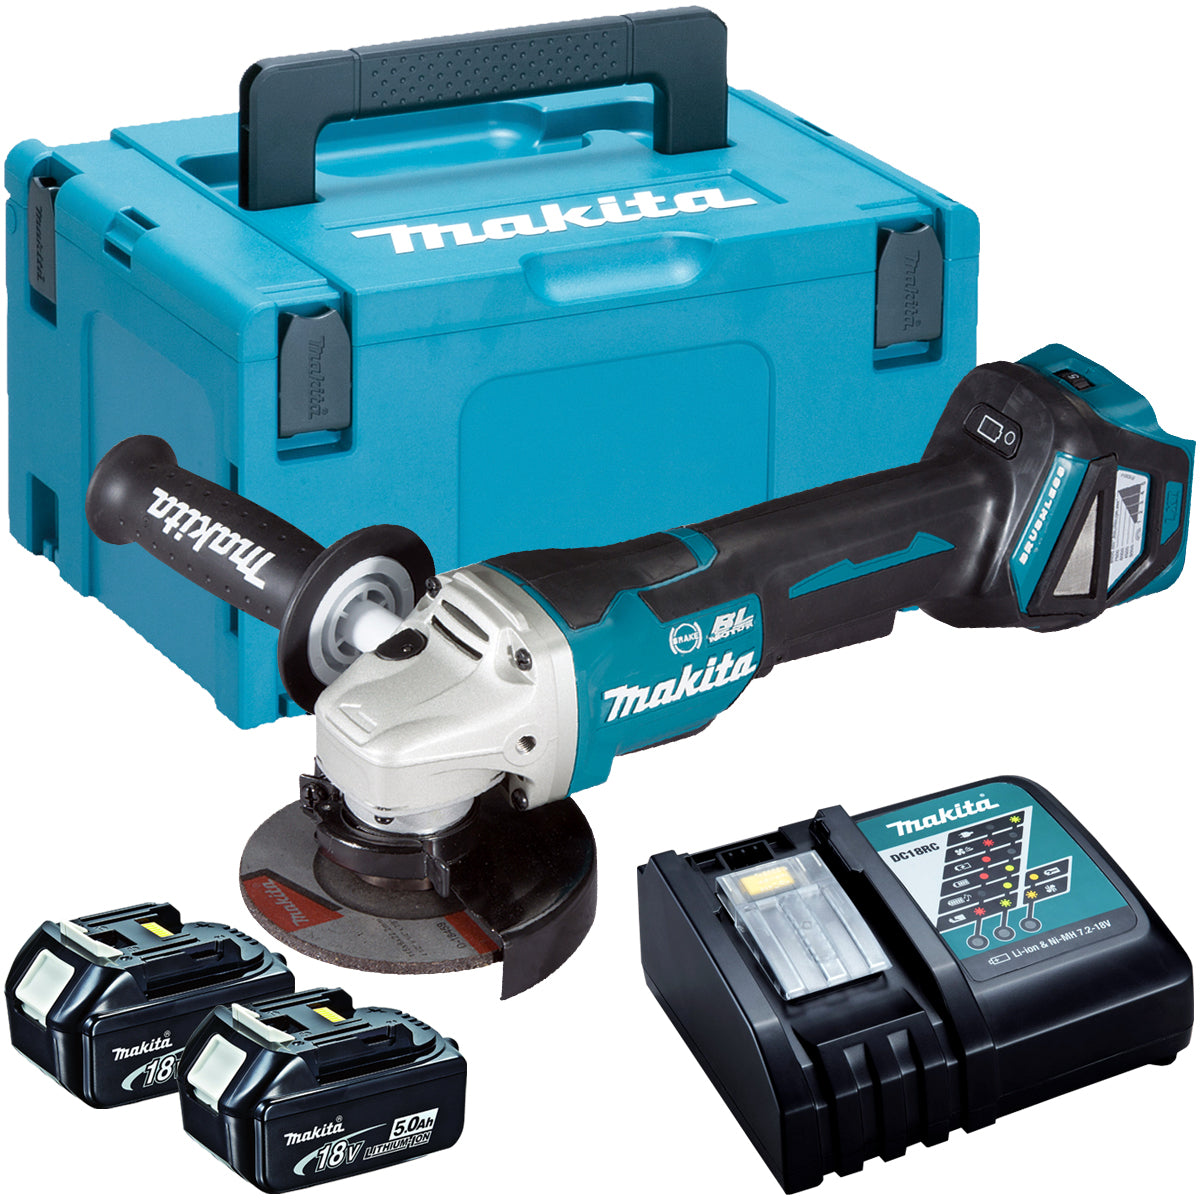 Makita DGA463Z 18V Brushless 115mm Angle Grinder with 2 x 5.0Ah Batteries & Charger in Case